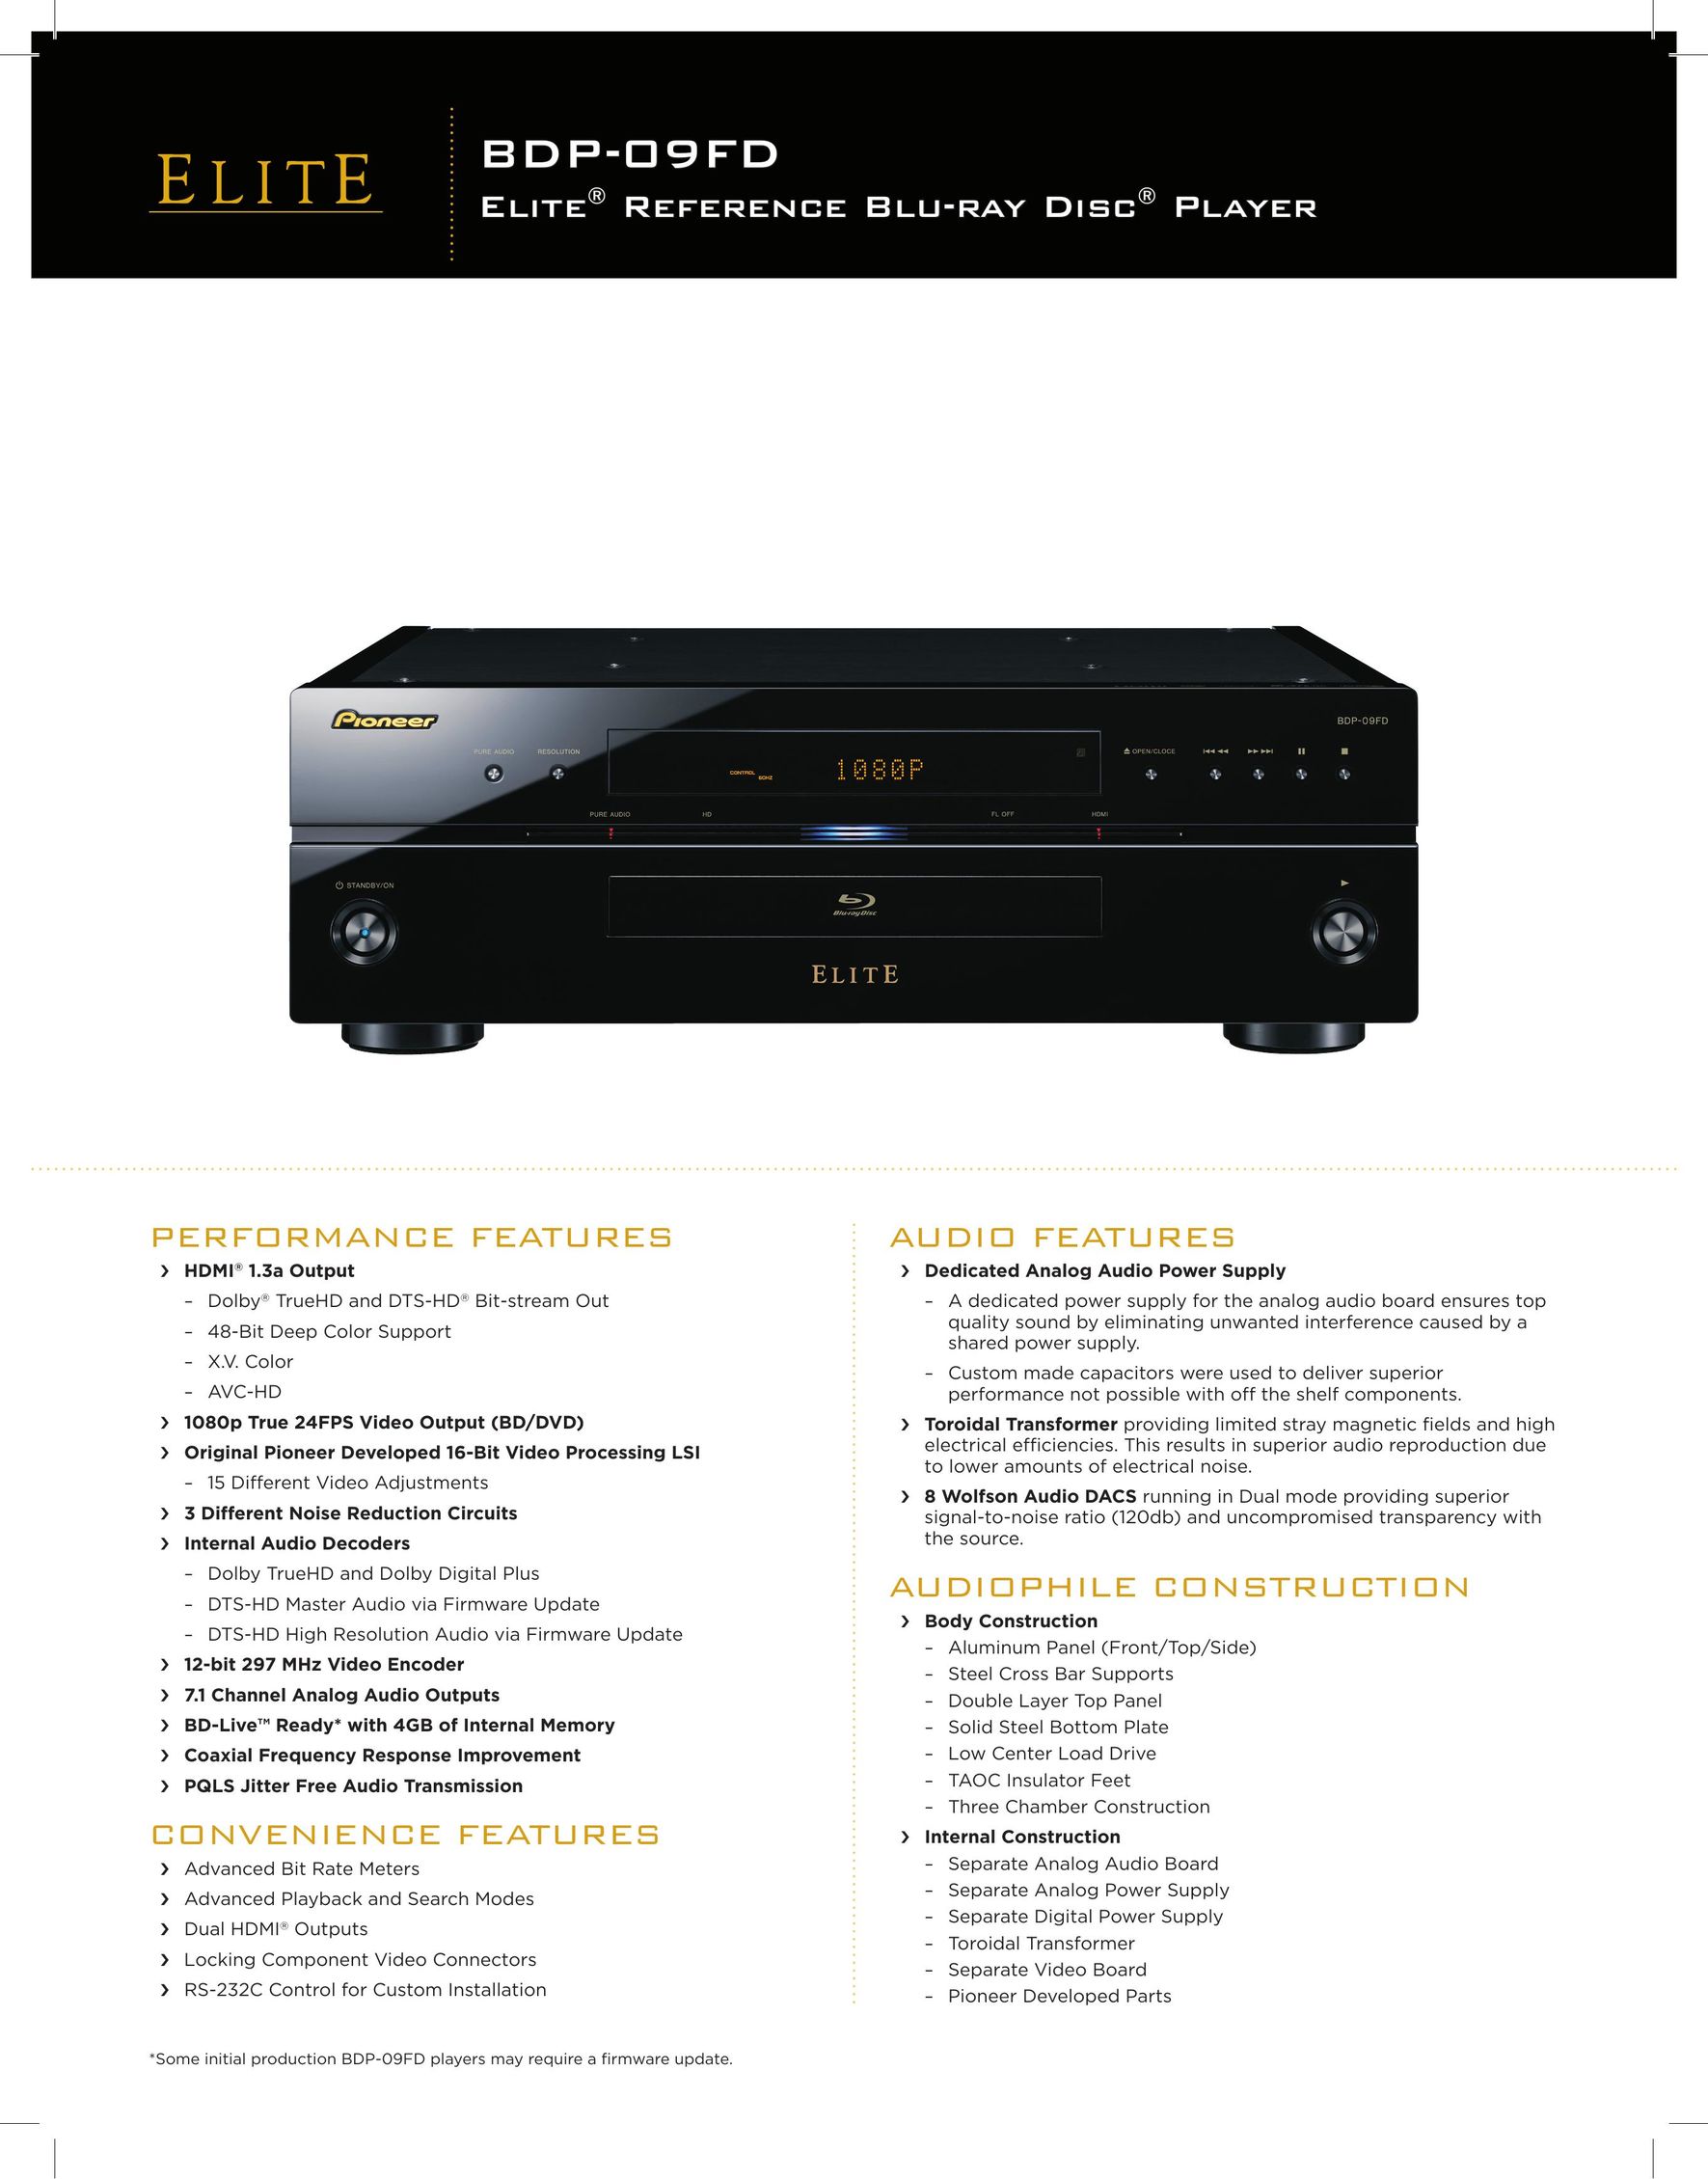 Elite BDP-09FD Blu-ray Player User Manual (Page 1)